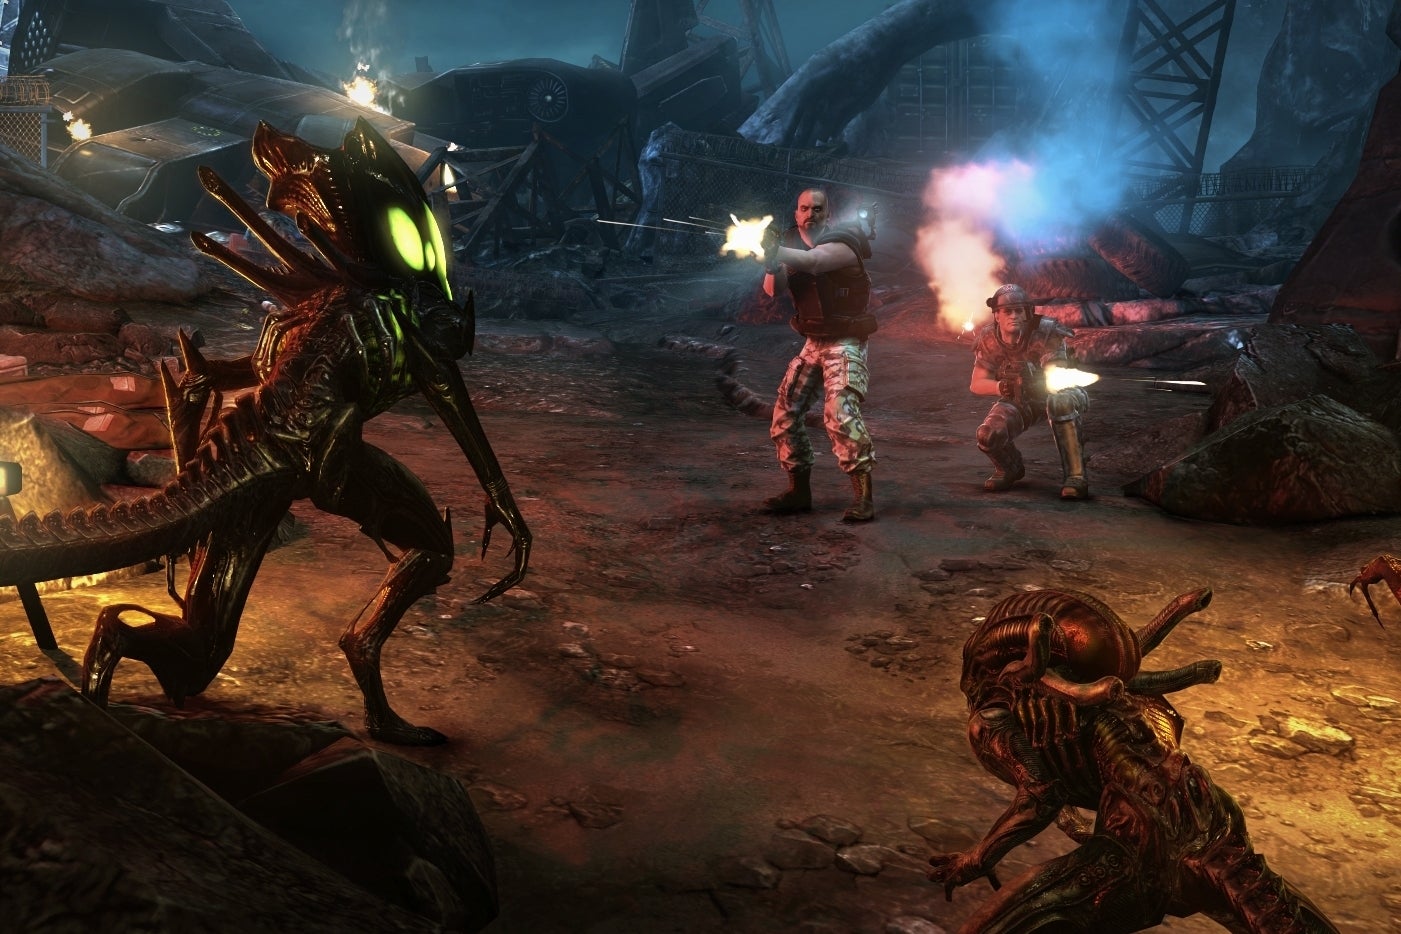 Image for Aliens: Colonial Marines has been patched on Xbox 360, PS3